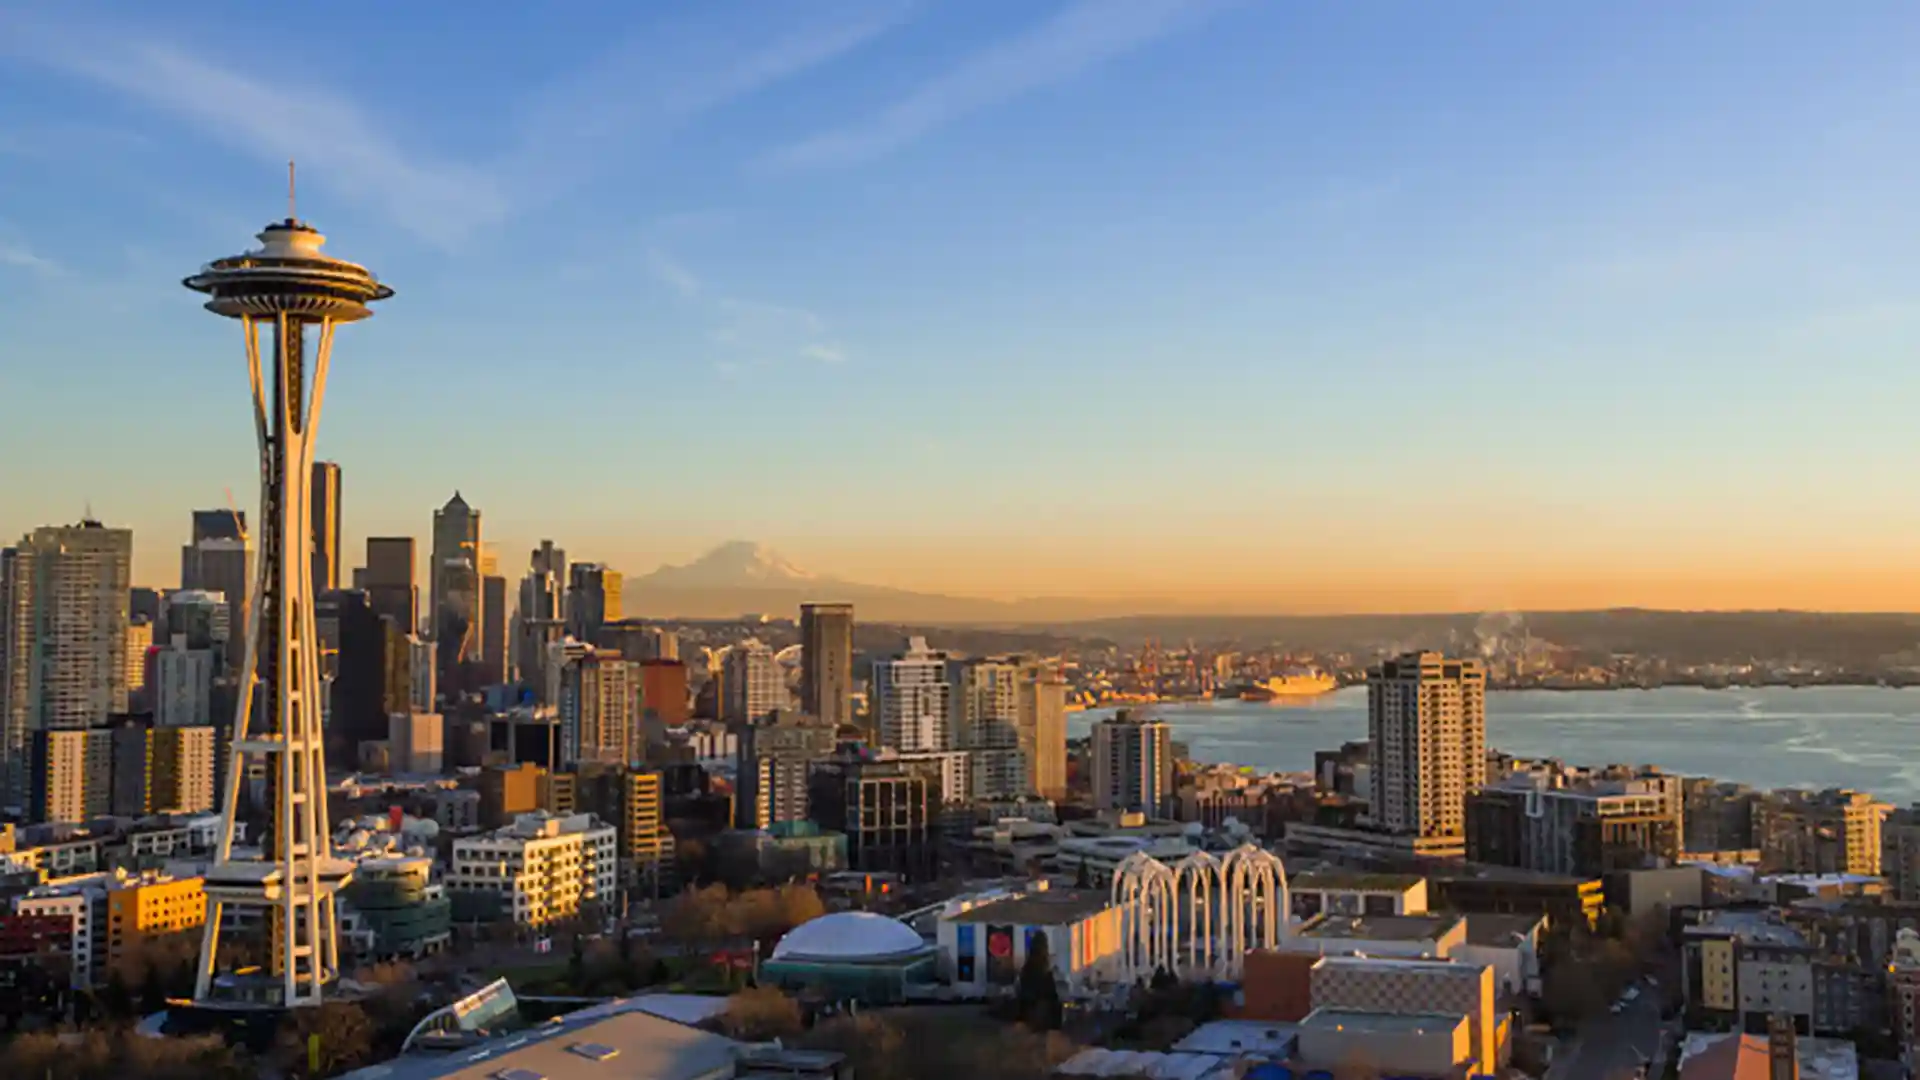 View of Seattle Space Needle and city landscape with Mt. Rainier in background.